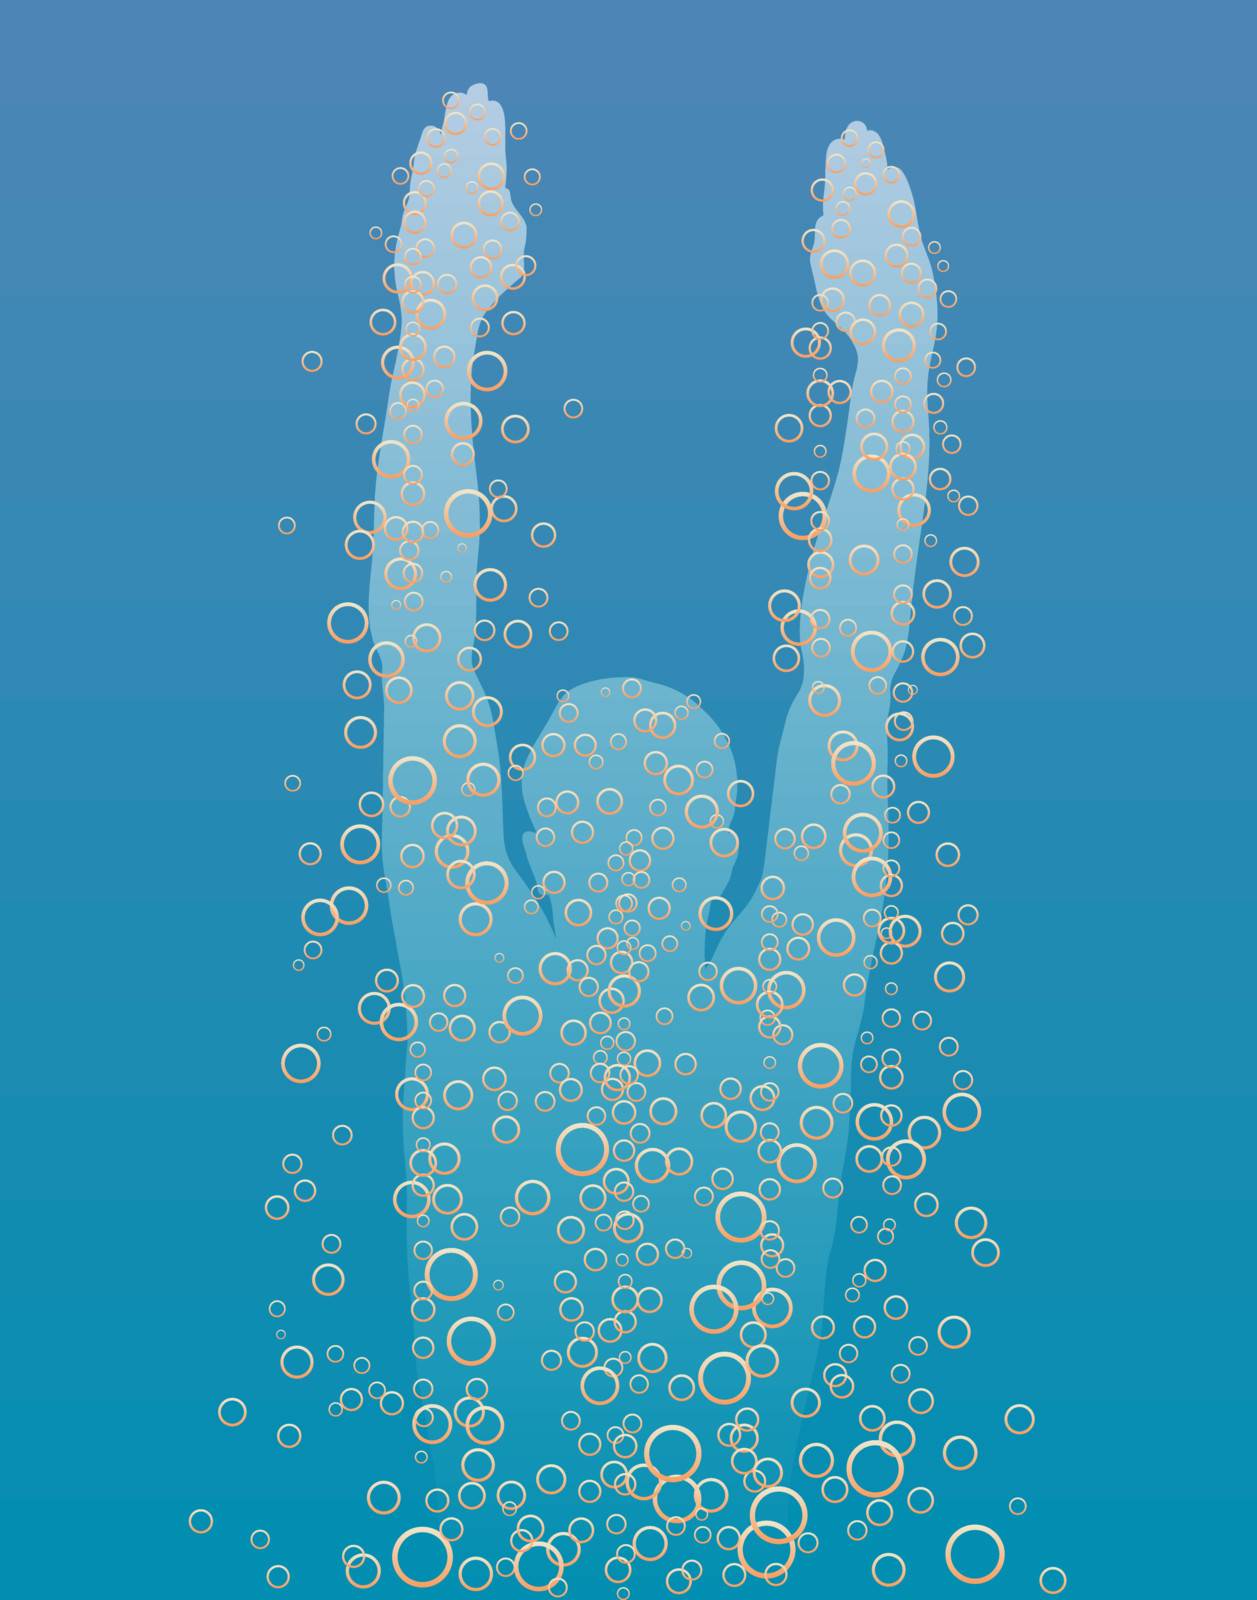 Editable vector illustration of a diver rising to the surface